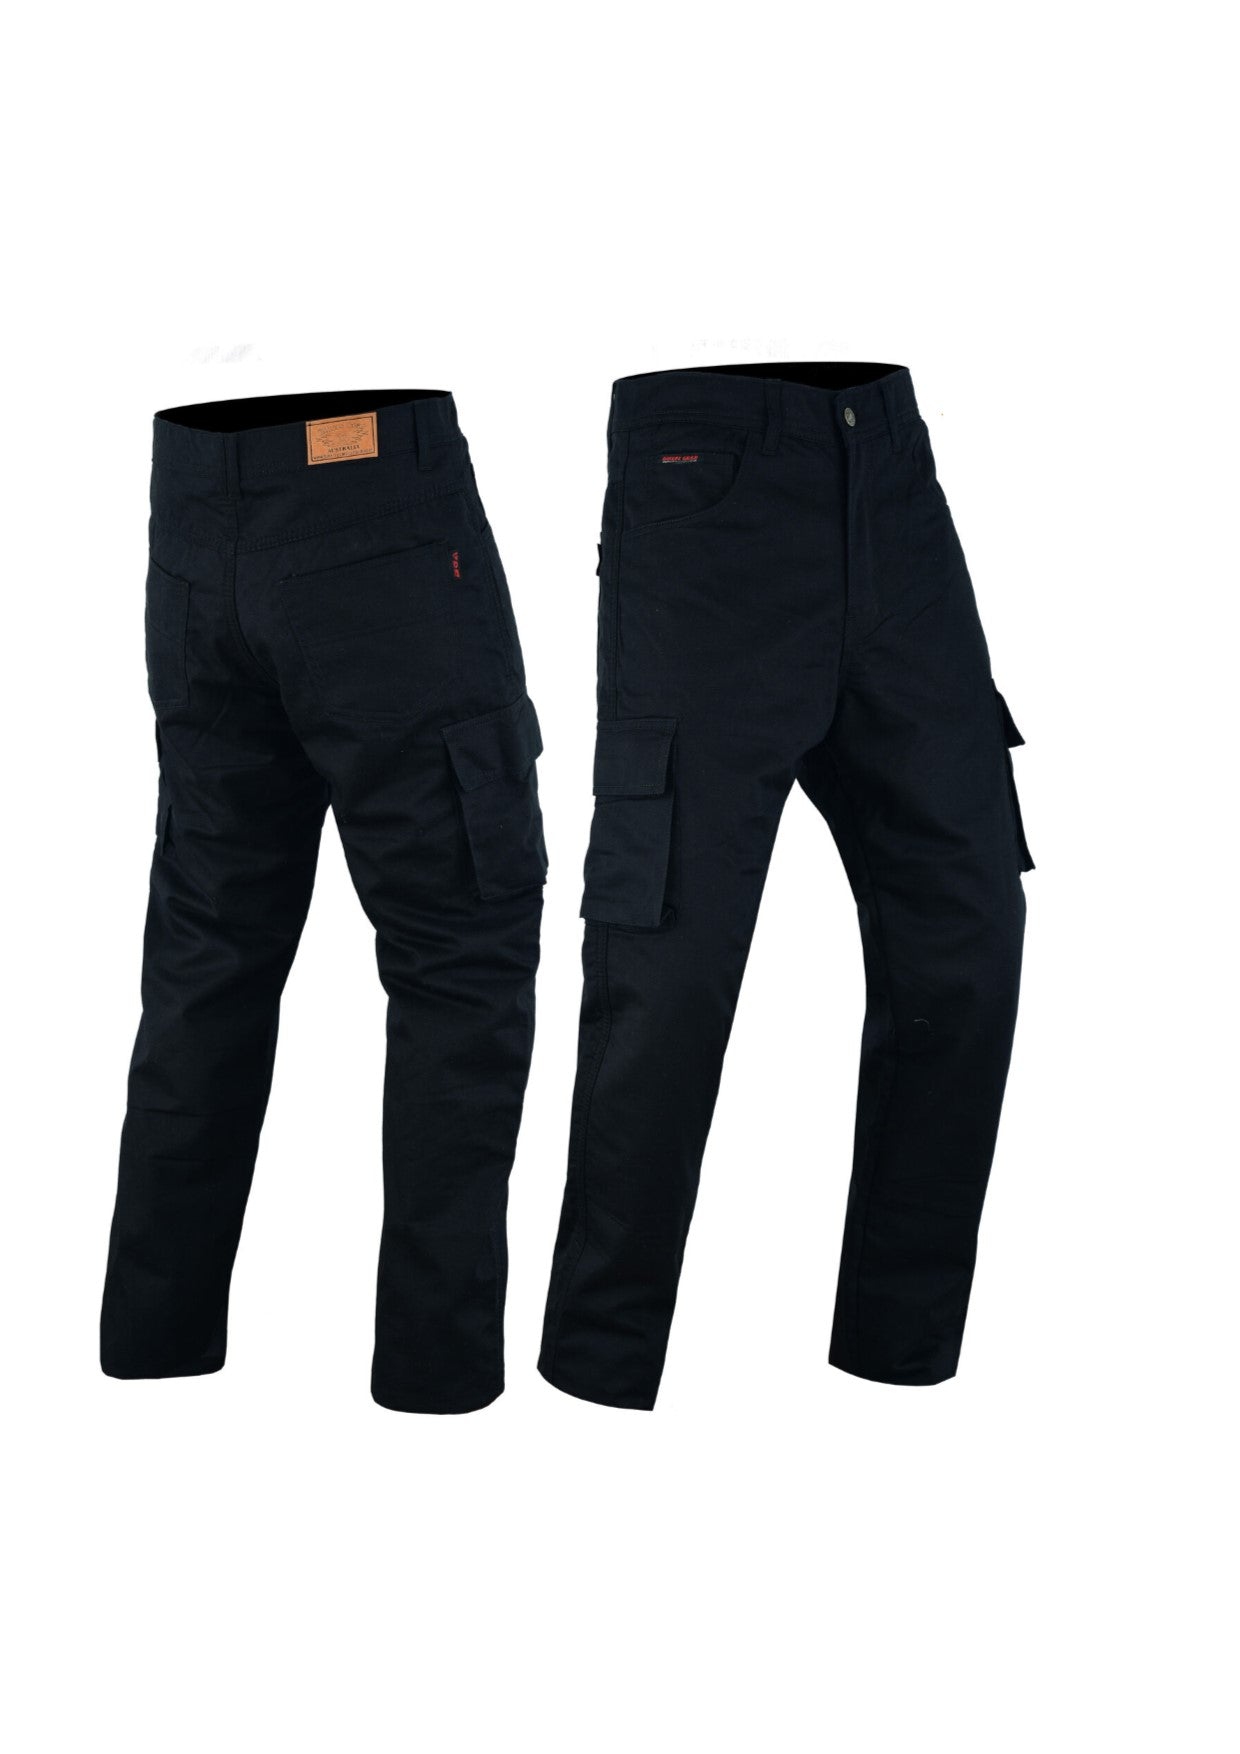 Mens Kevlar Cargo Pants with CE Armour